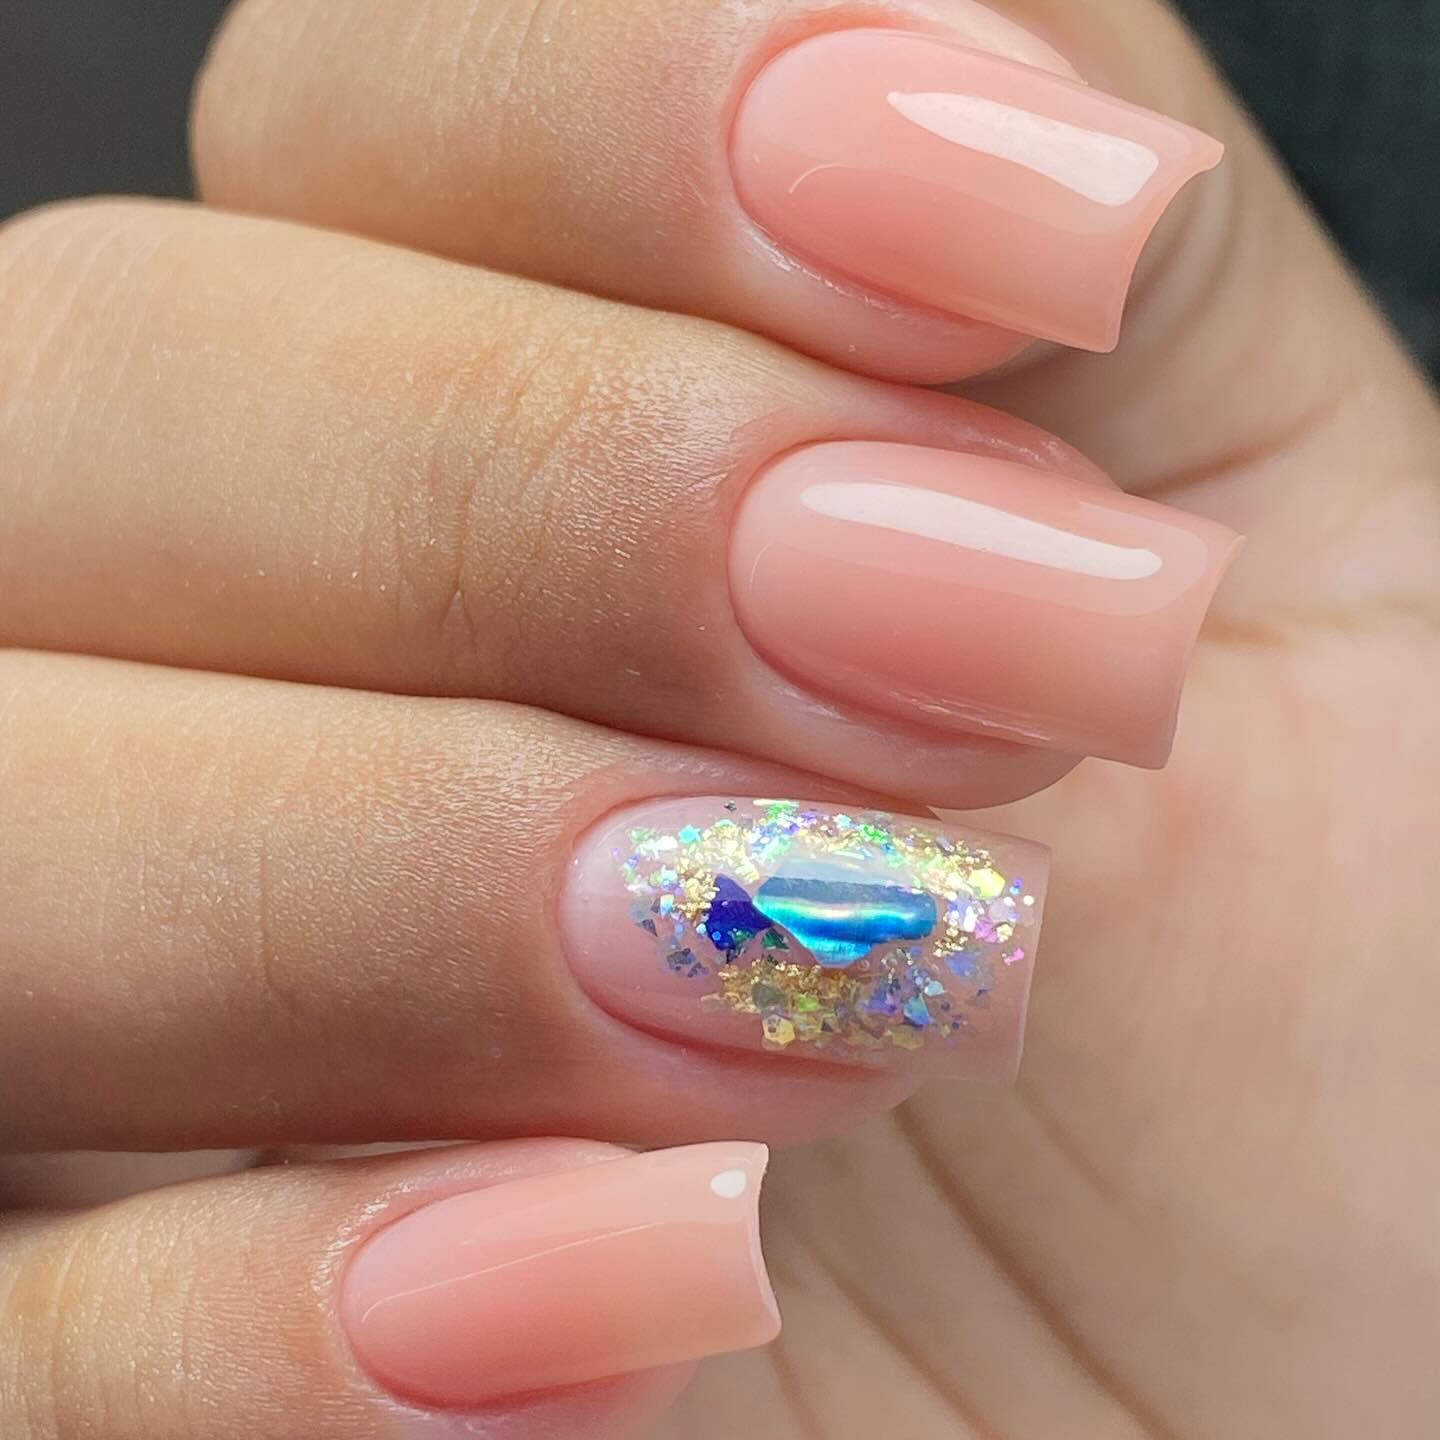 100 Of The Best Spring Inspired Nail Designs images 100